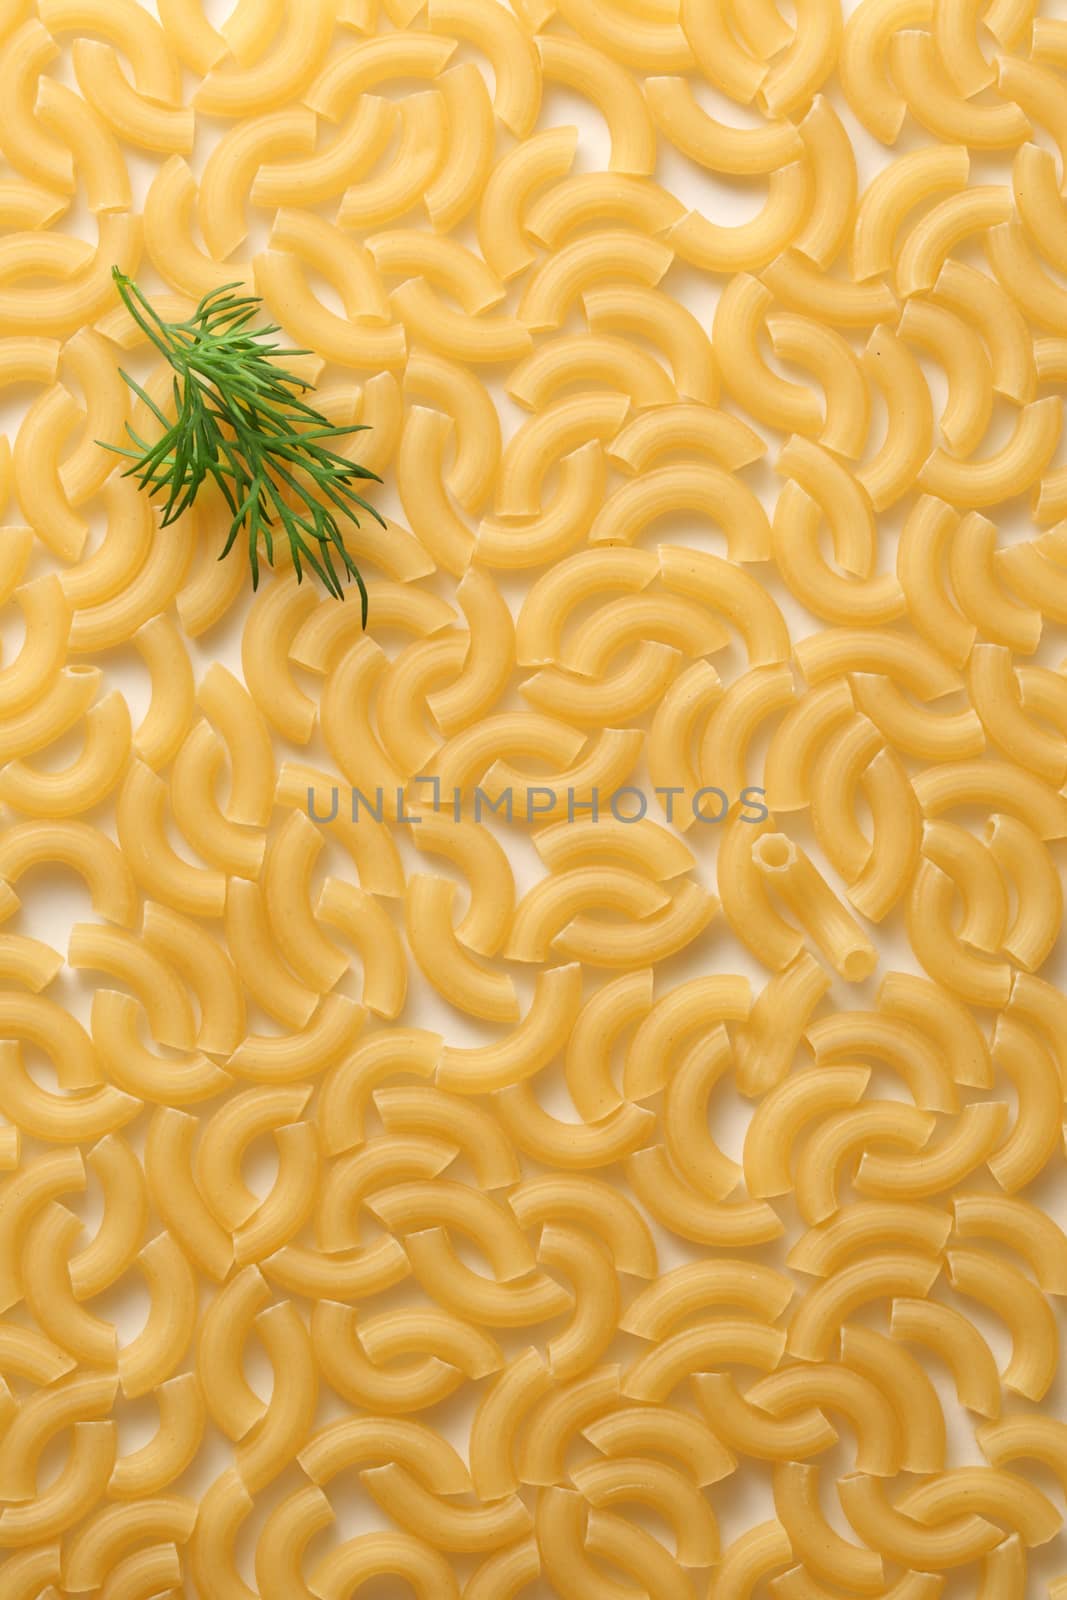 Short ribbed pasta tubes background with dill